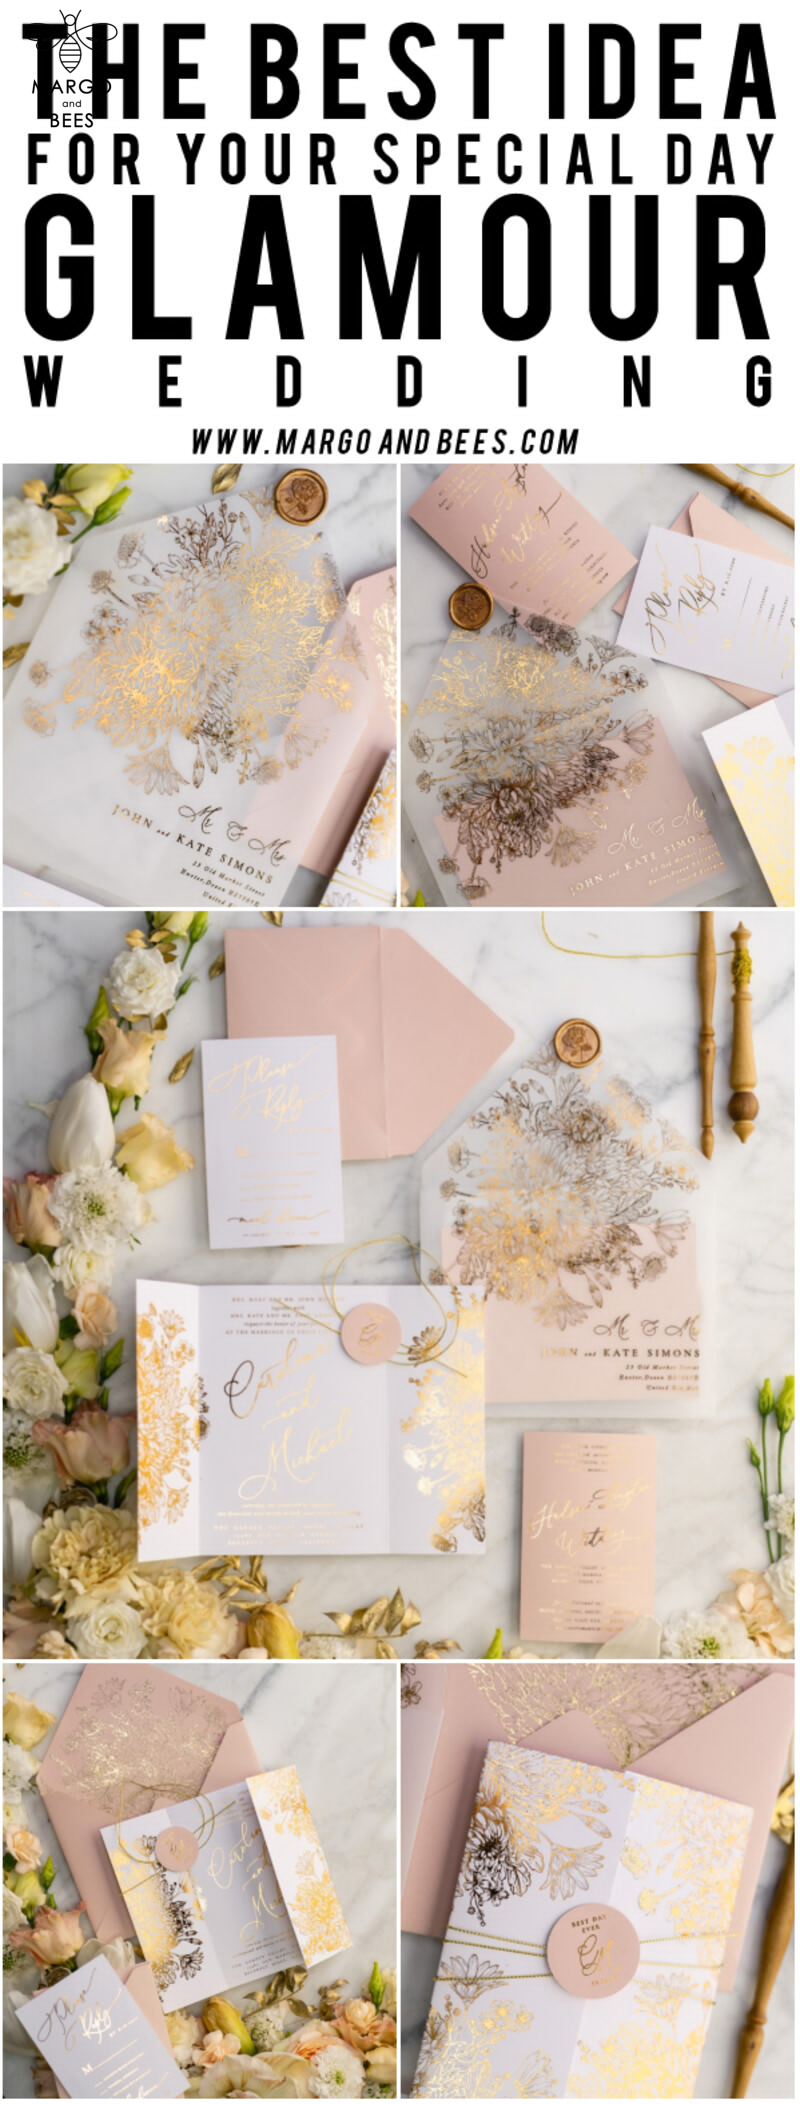 Exquisite Arabic Golden Wedding Invitations with Glamour Gold Foil for a Romantic Blush Pink Affair: Bespoke Indian Wedding Stationery-42